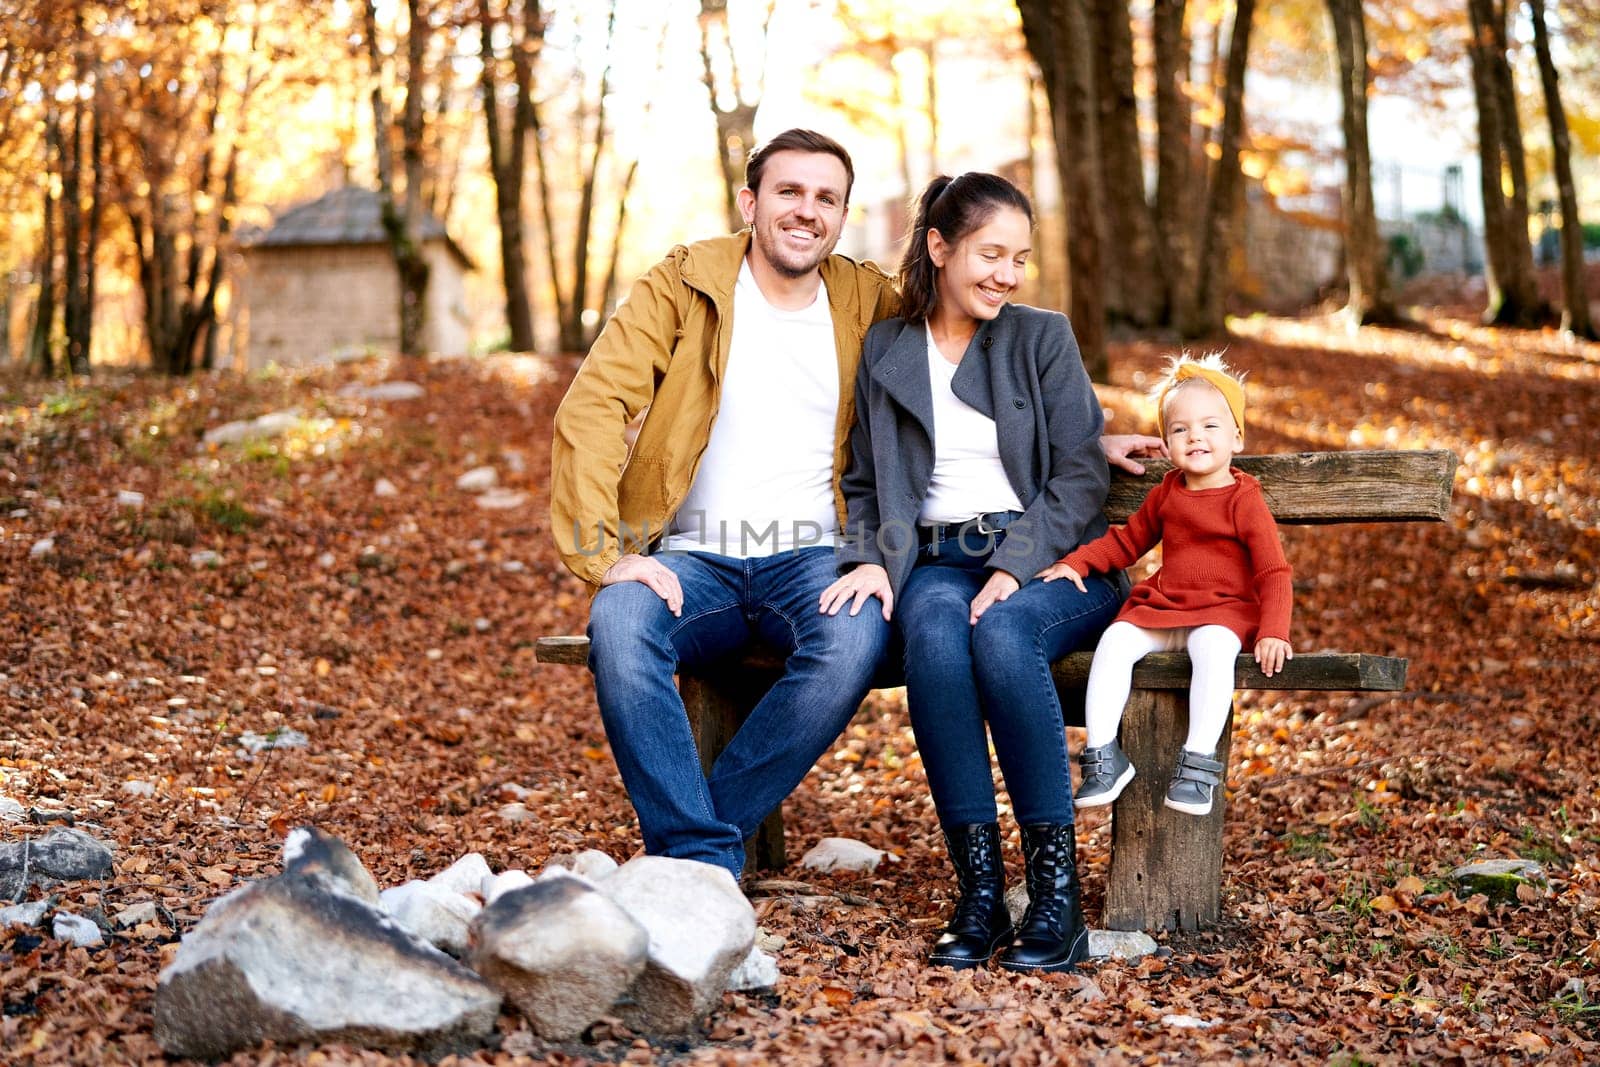 Smiling mom and dad with a little girl are sitting on a bench in the autumn forest. High quality photo